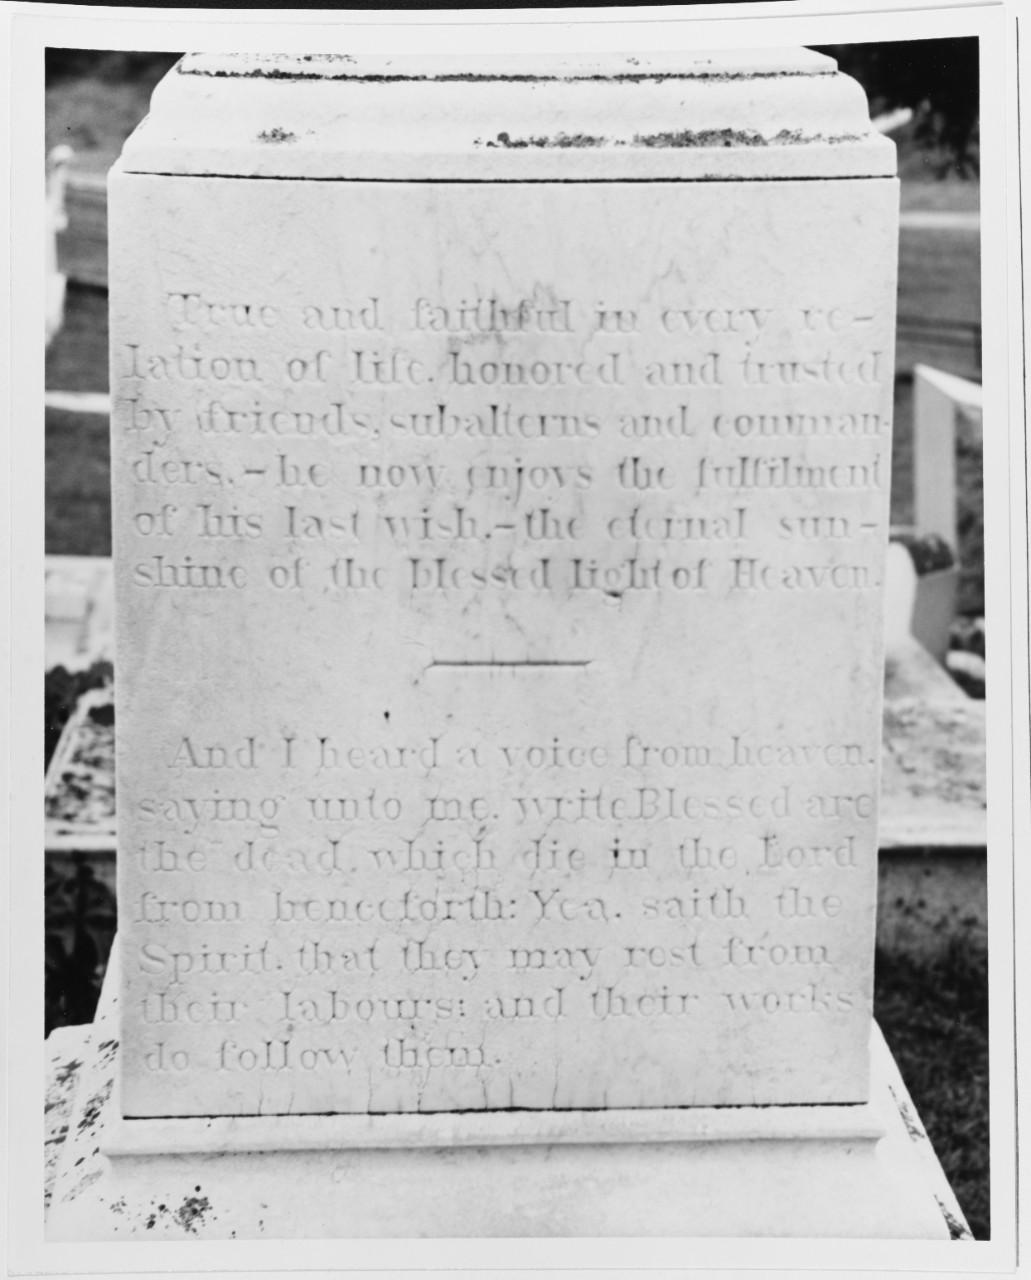 Inscription on Monuments to James Waddell in St. Anne's Cemetery in Annapolis, Maryland, June, 1965